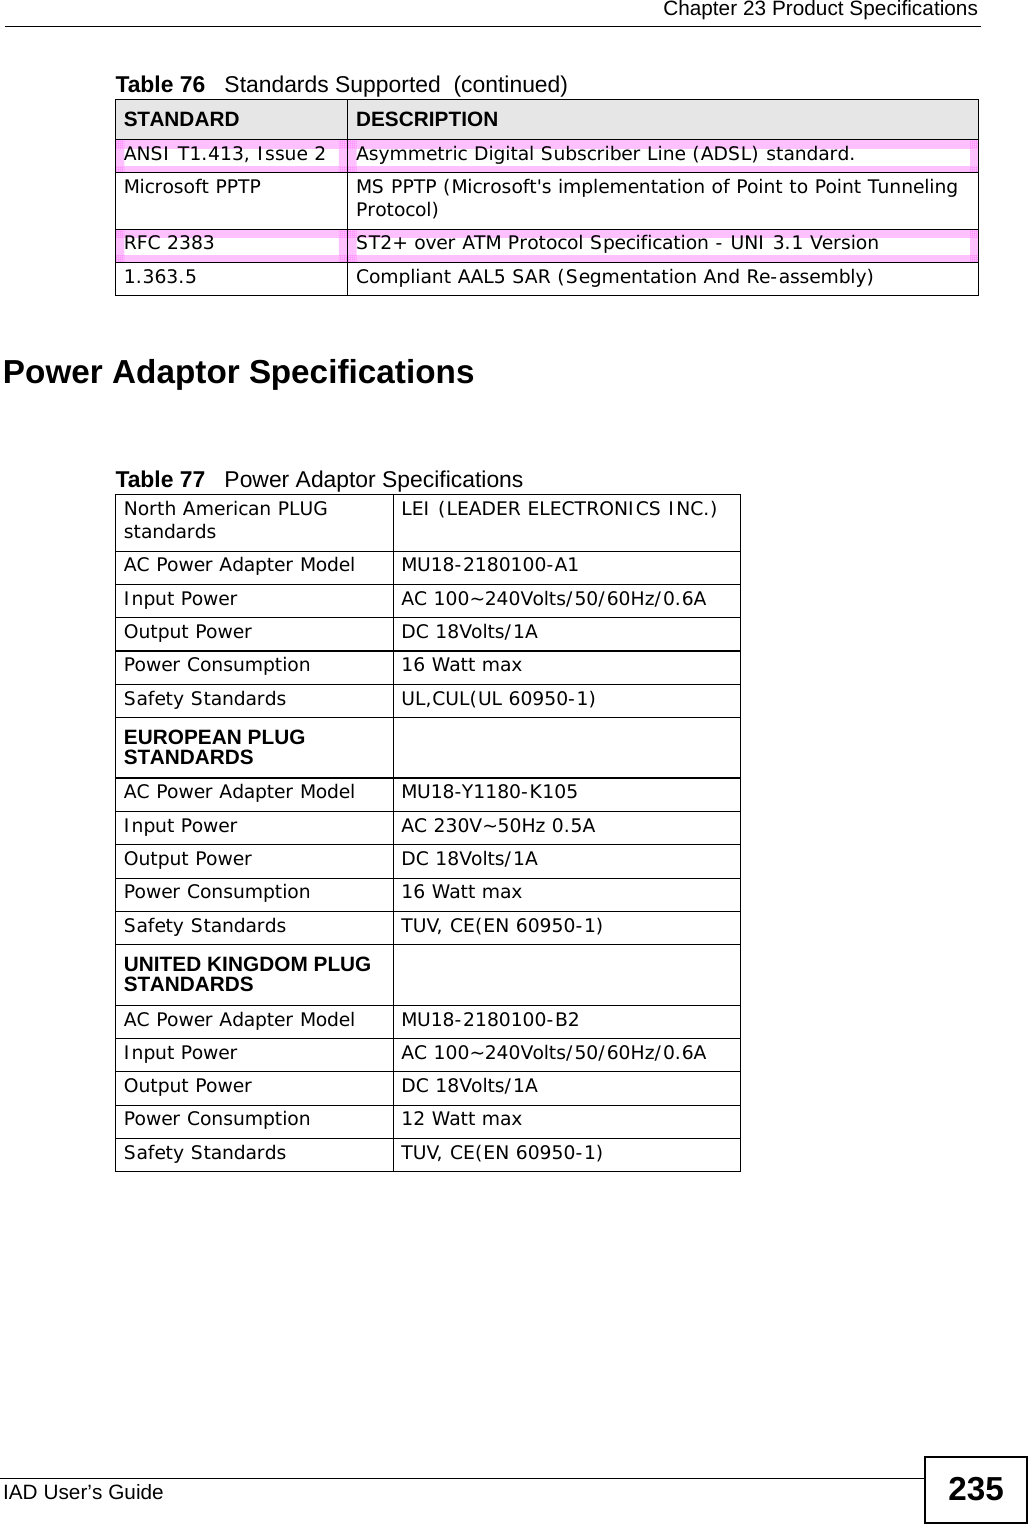  Chapter 23 Product SpecificationsIAD User’s Guide 235Power Adaptor SpecificationsANSI T1.413, Issue 2 Asymmetric Digital Subscriber Line (ADSL) standard.Microsoft PPTP MS PPTP (Microsoft&apos;s implementation of Point to Point Tunneling Protocol)RFC 2383 ST2+ over ATM Protocol Specification - UNI 3.1 Version1.363.5 Compliant AAL5 SAR (Segmentation And Re-assembly) Table 76   Standards Supported  (continued)STANDARD DESCRIPTIONTable 77   Power Adaptor SpecificationsNorth American PLUG standards LEI (LEADER ELECTRONICS INC.)AC Power Adapter Model  MU18-2180100-A1 Input Power AC 100~240Volts/50/60Hz/0.6AOutput Power  DC 18Volts/1APower Consumption 16 Watt maxSafety Standards  UL,CUL(UL 60950-1)EUROPEAN PLUG STANDARDSAC Power Adapter Model MU18-Y1180-K105Input Power AC 230V~50Hz 0.5AOutput Power DC 18Volts/1APower Consumption 16 Watt maxSafety Standards TUV, CE(EN 60950-1)UNITED KINGDOM PLUG STANDARDSAC Power Adapter Model MU18-2180100-B2Input Power AC 100~240Volts/50/60Hz/0.6AOutput Power DC 18Volts/1APower Consumption 12 Watt maxSafety Standards  TUV, CE(EN 60950-1)